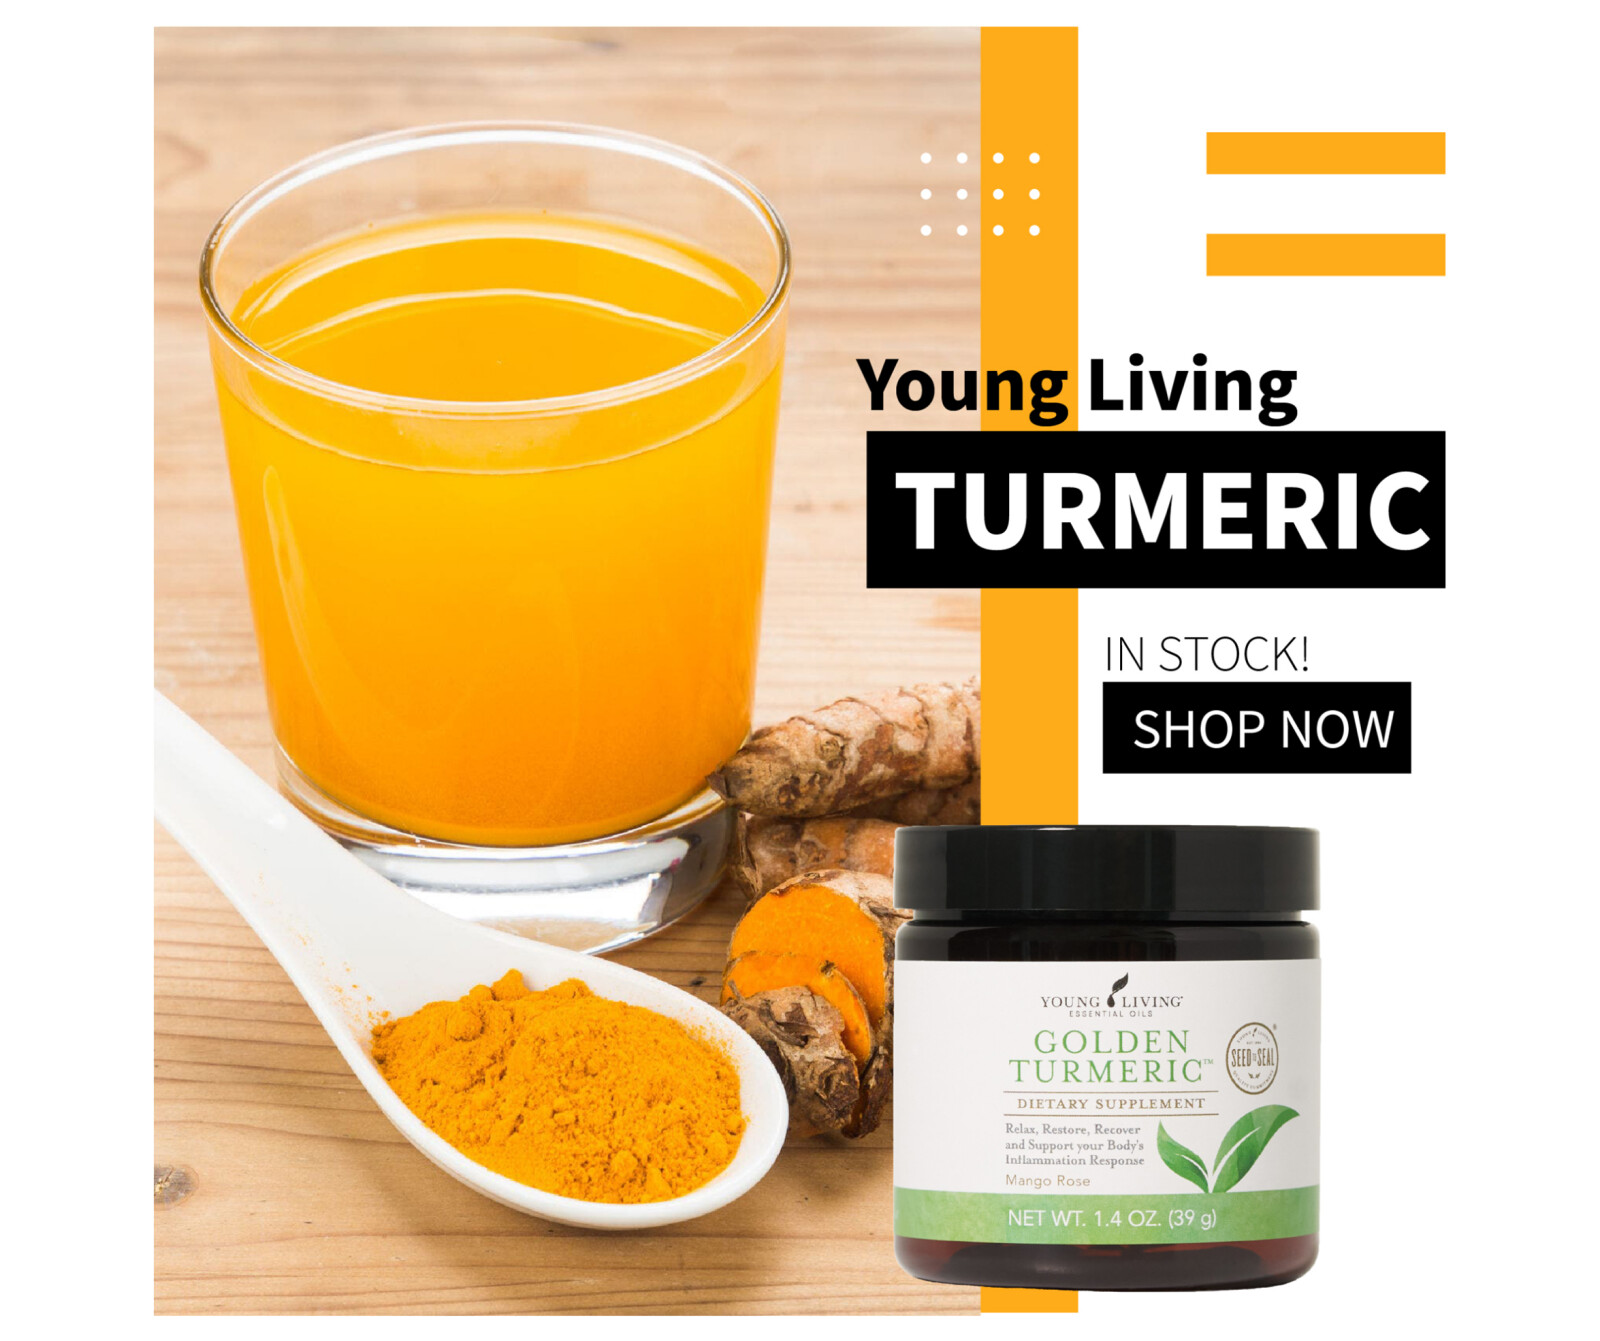 Golden Turmeric by Young Living